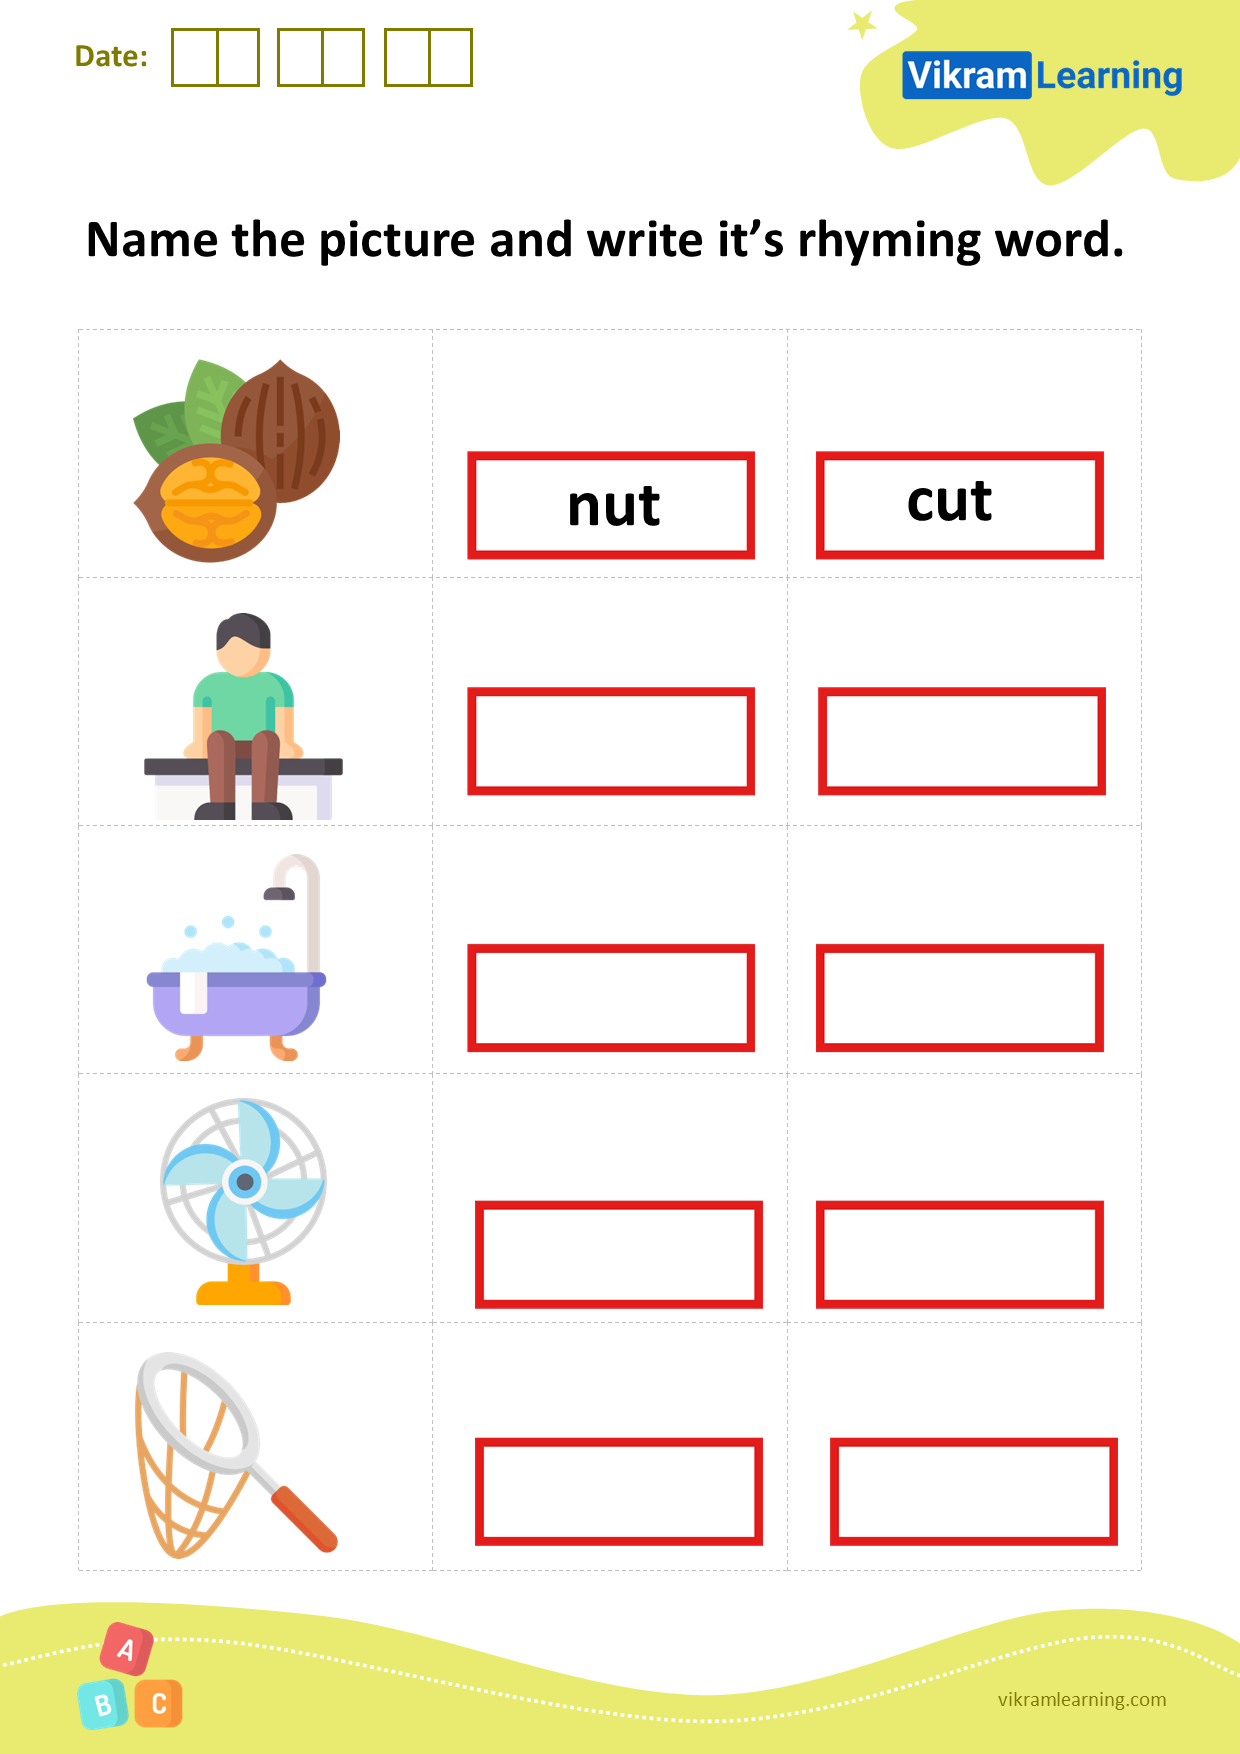 Download name the picture and write it’s a rhyming word worksheets